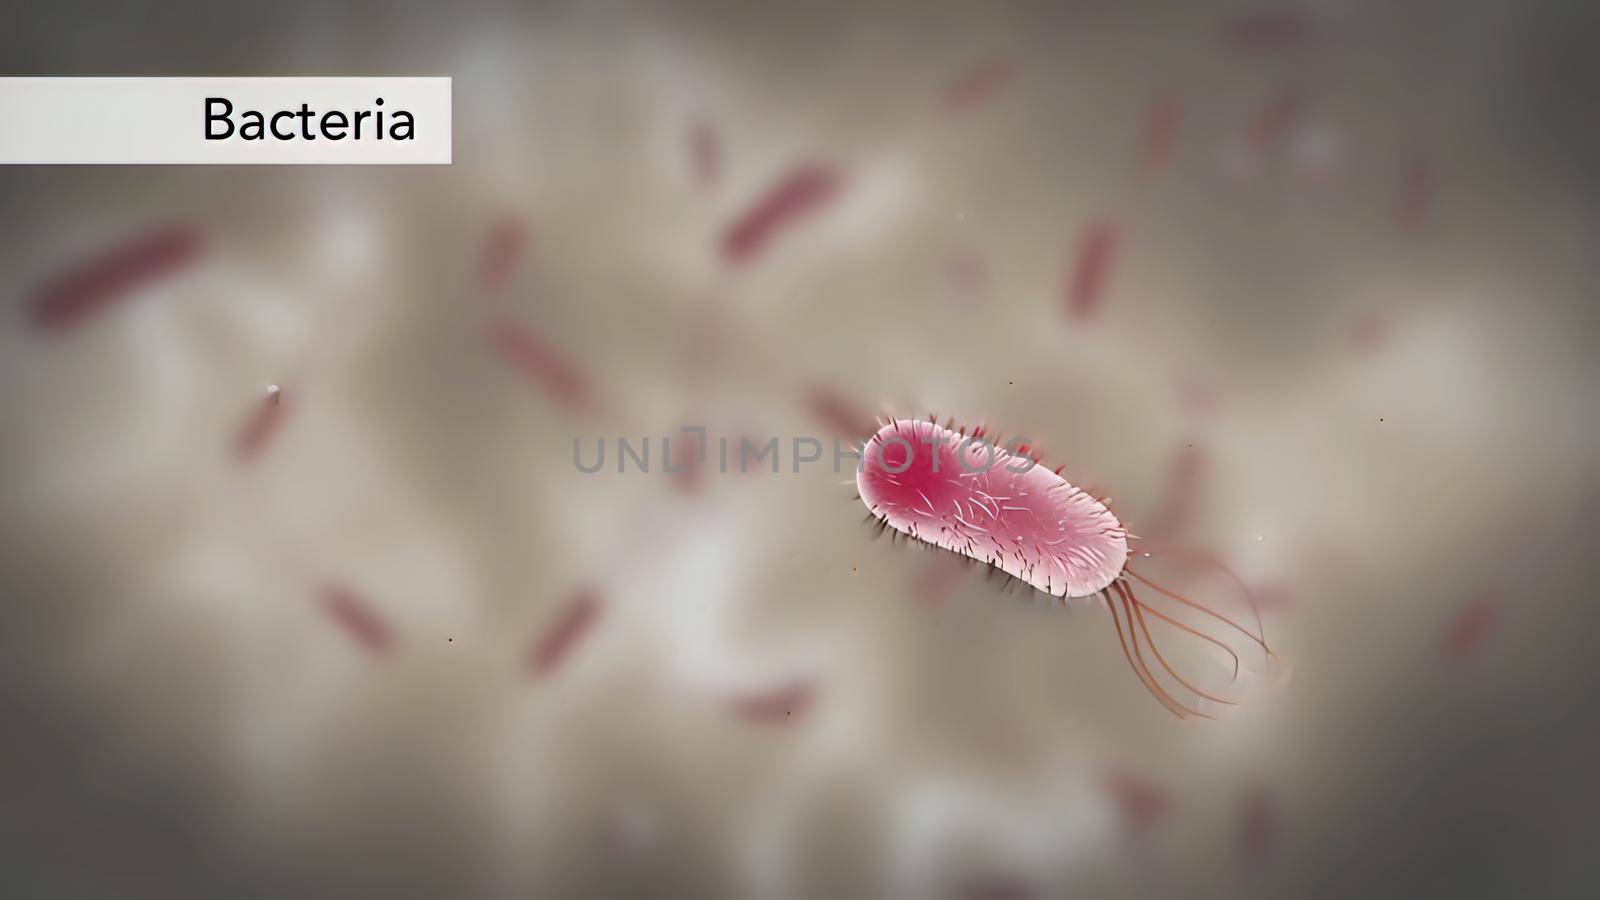 Bacteria Under The Microscope by creativepic